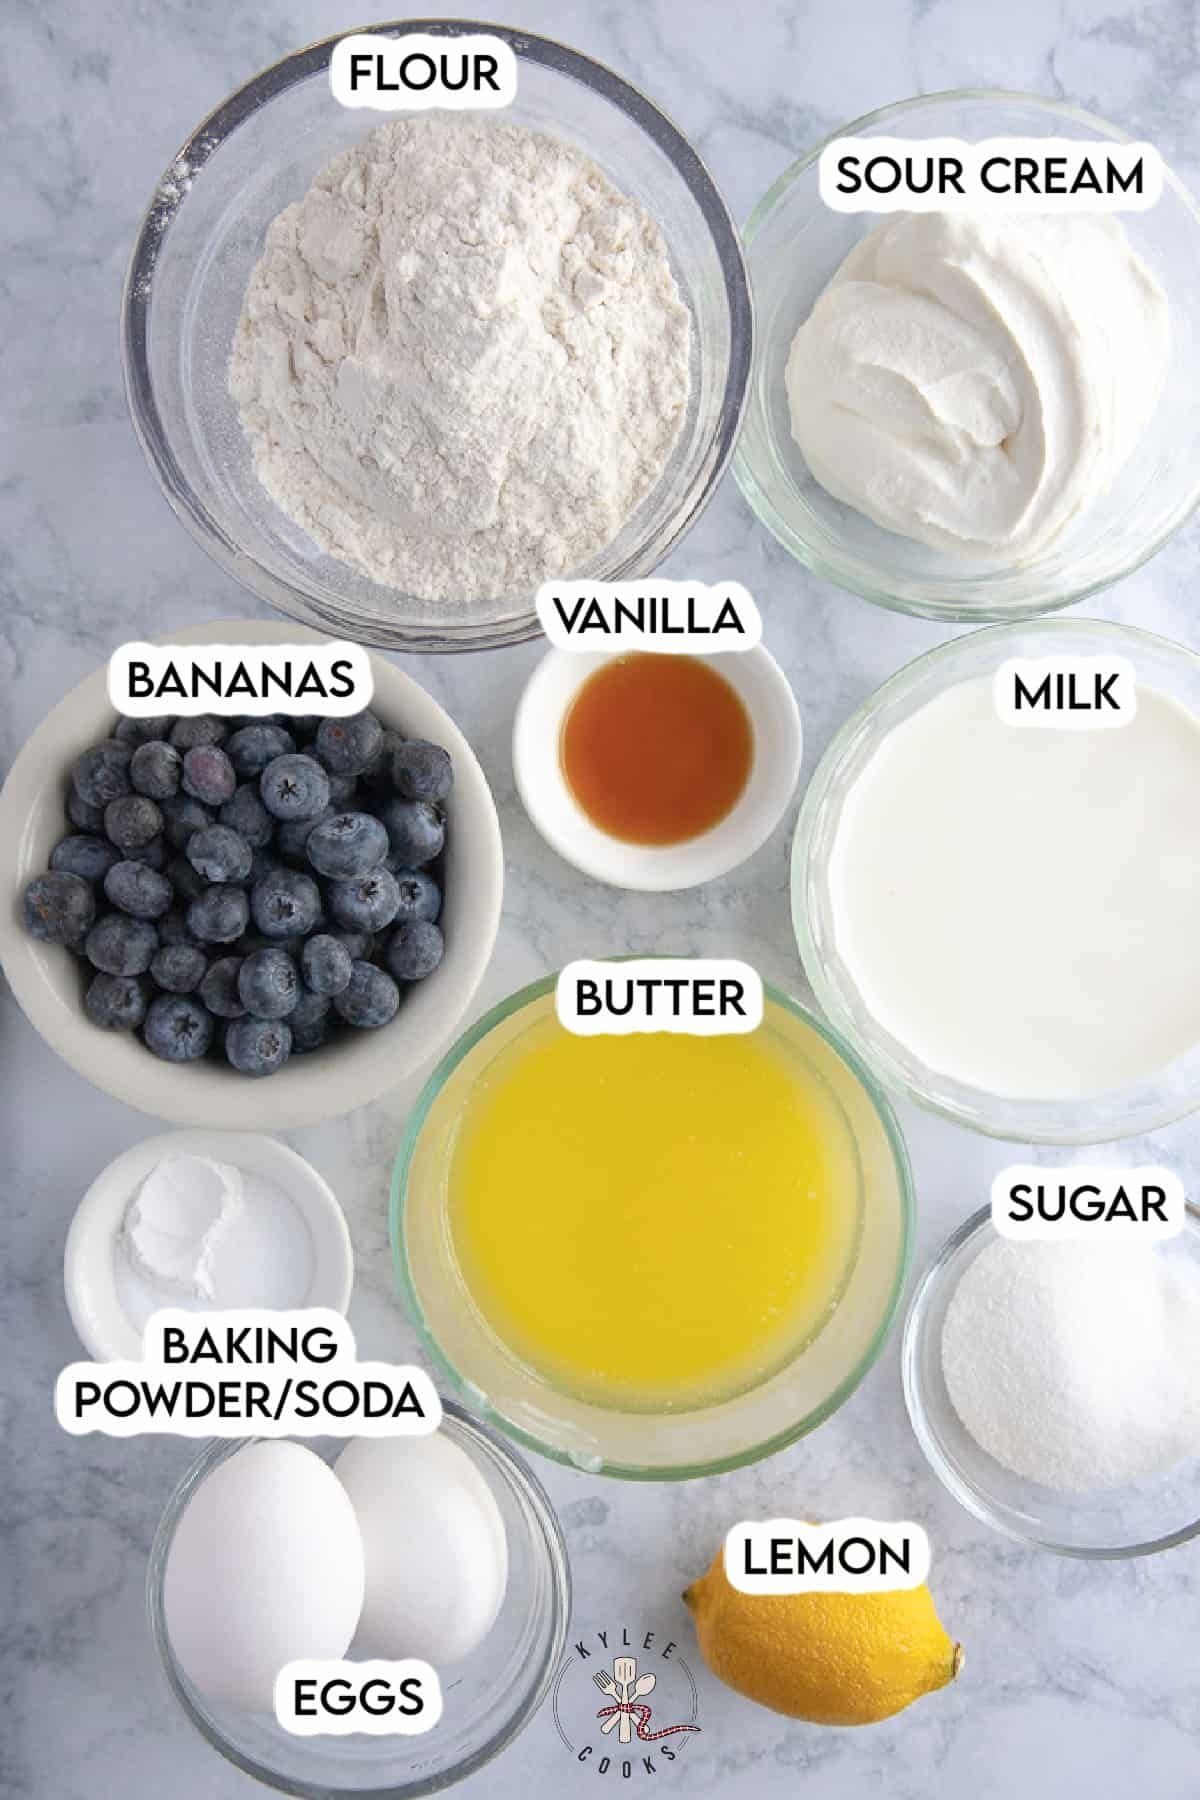 ingredients to make blueberry pancakes laid out and labeled.